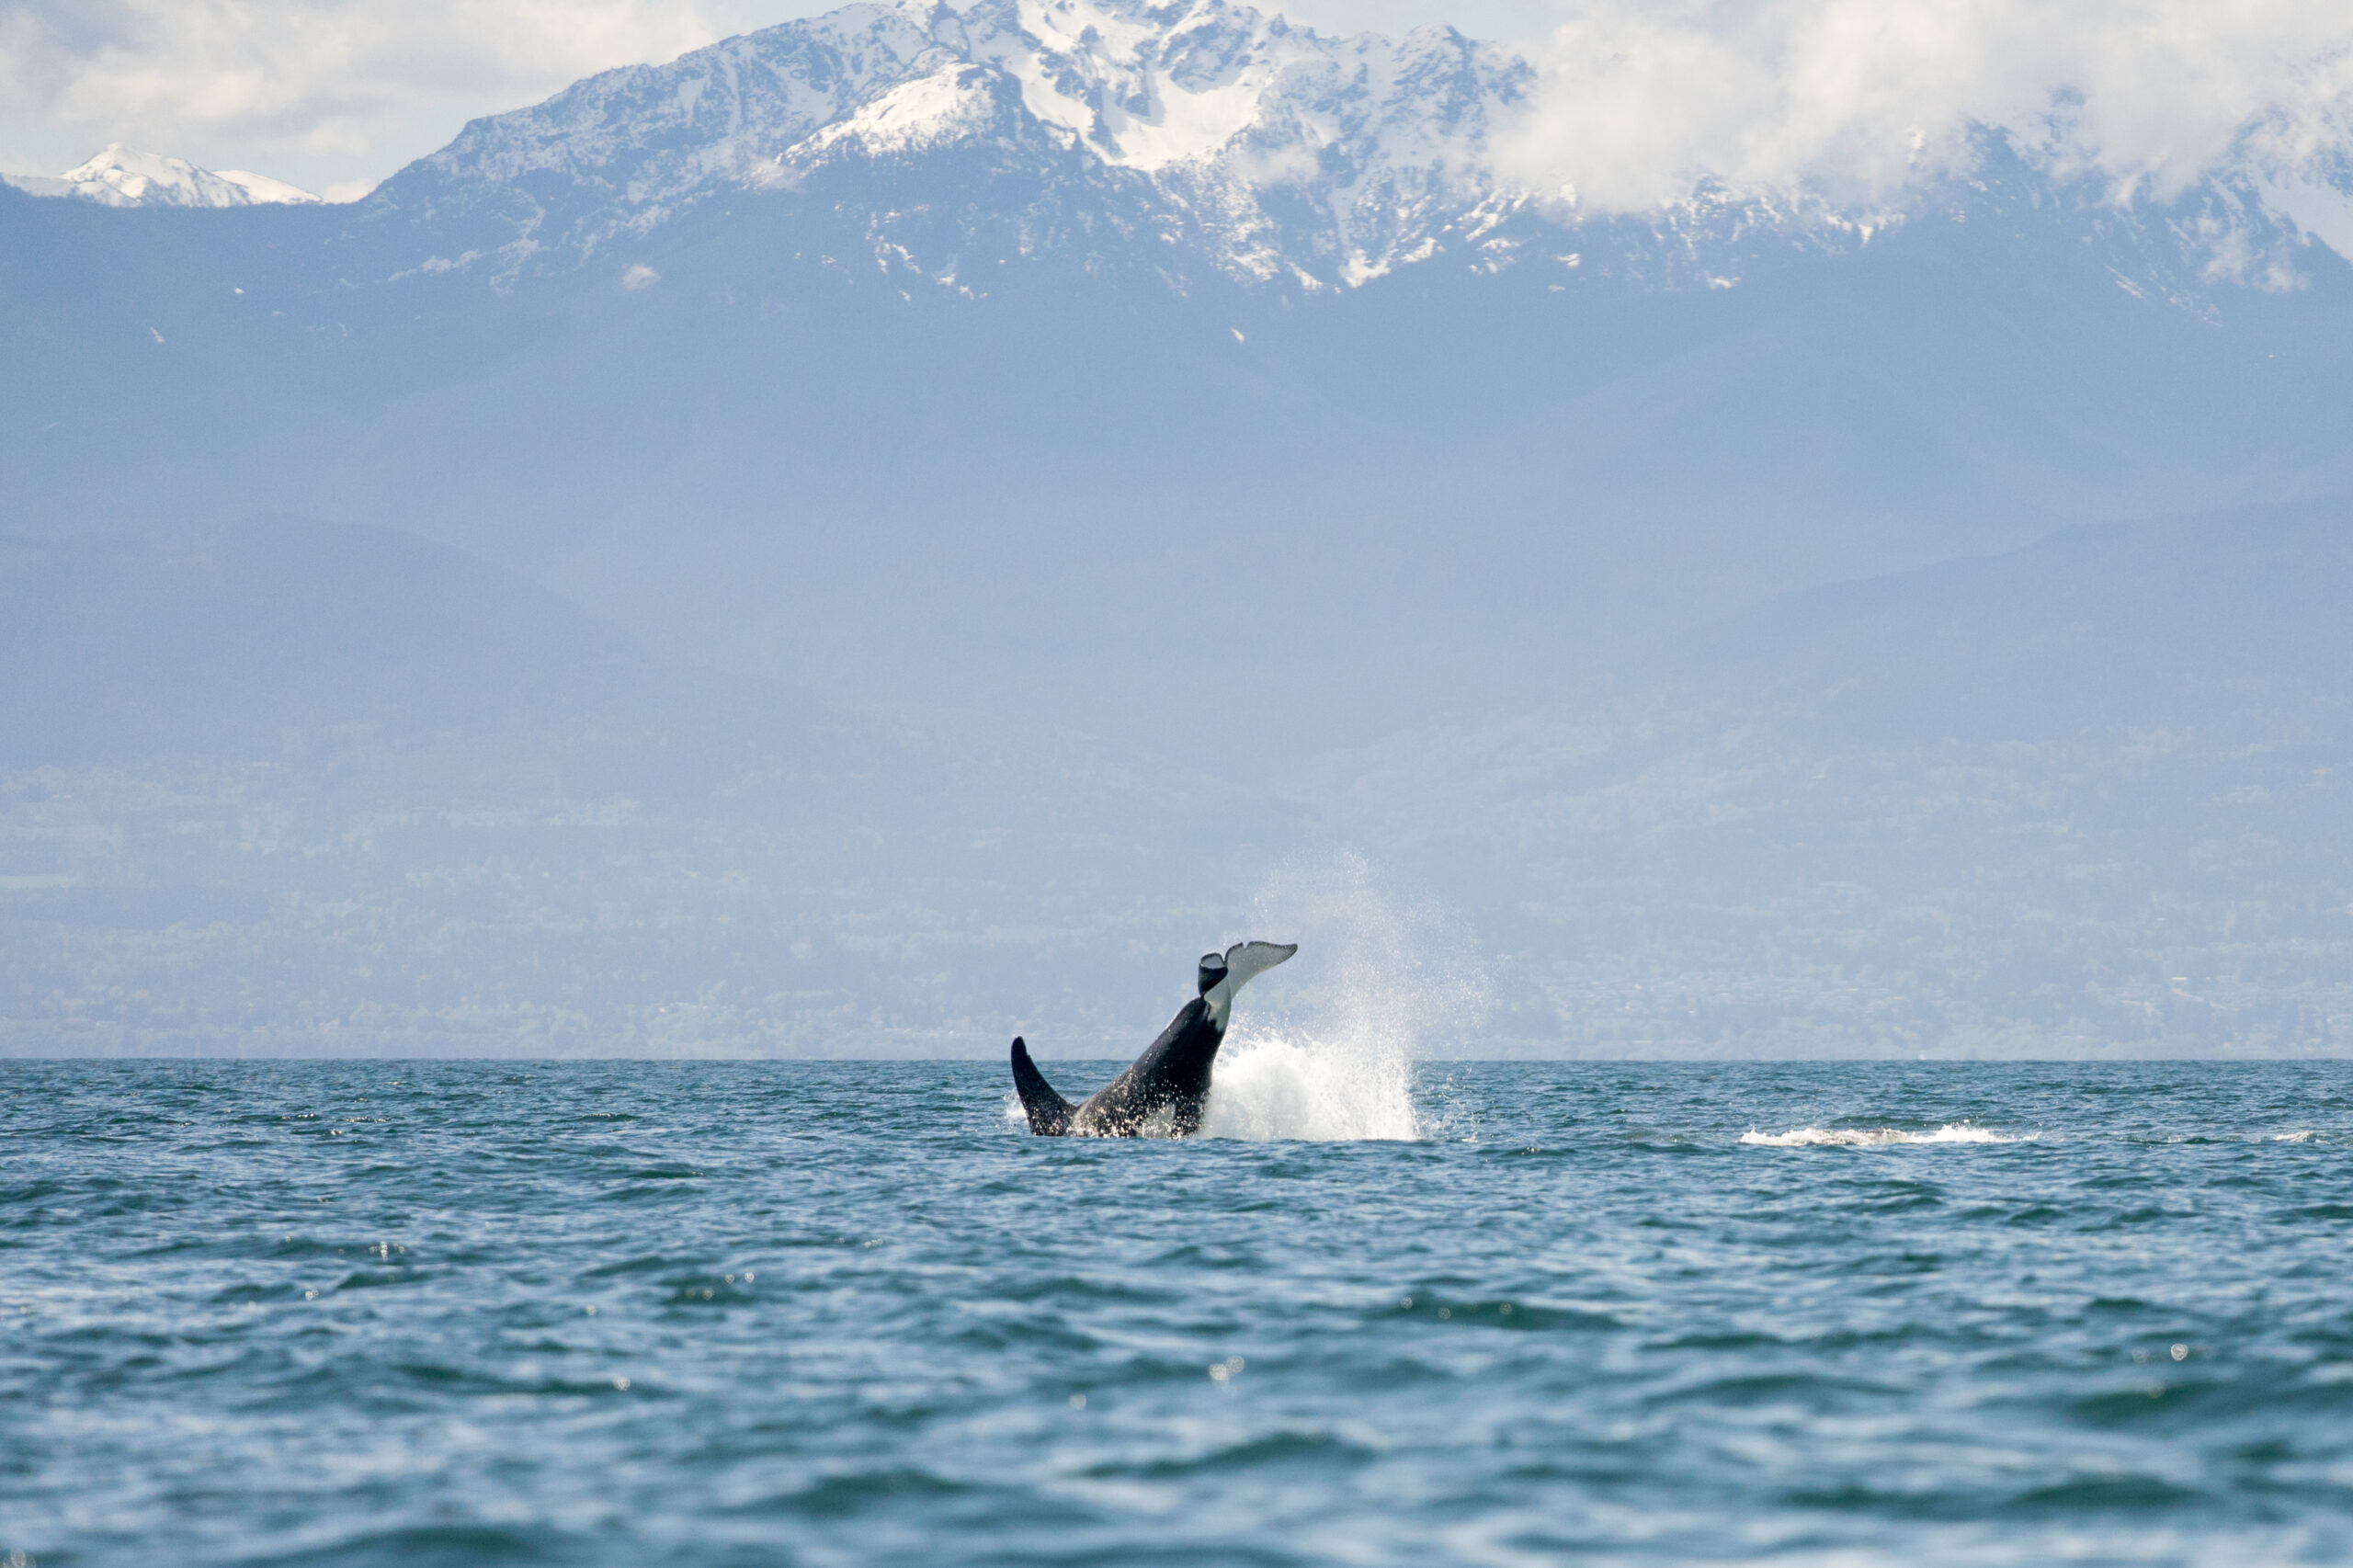 https://discovervancouvertours.com/wp-content/uploads/2022/07/©LisanneSmeele-Whalewatching-39-scaled.jpg